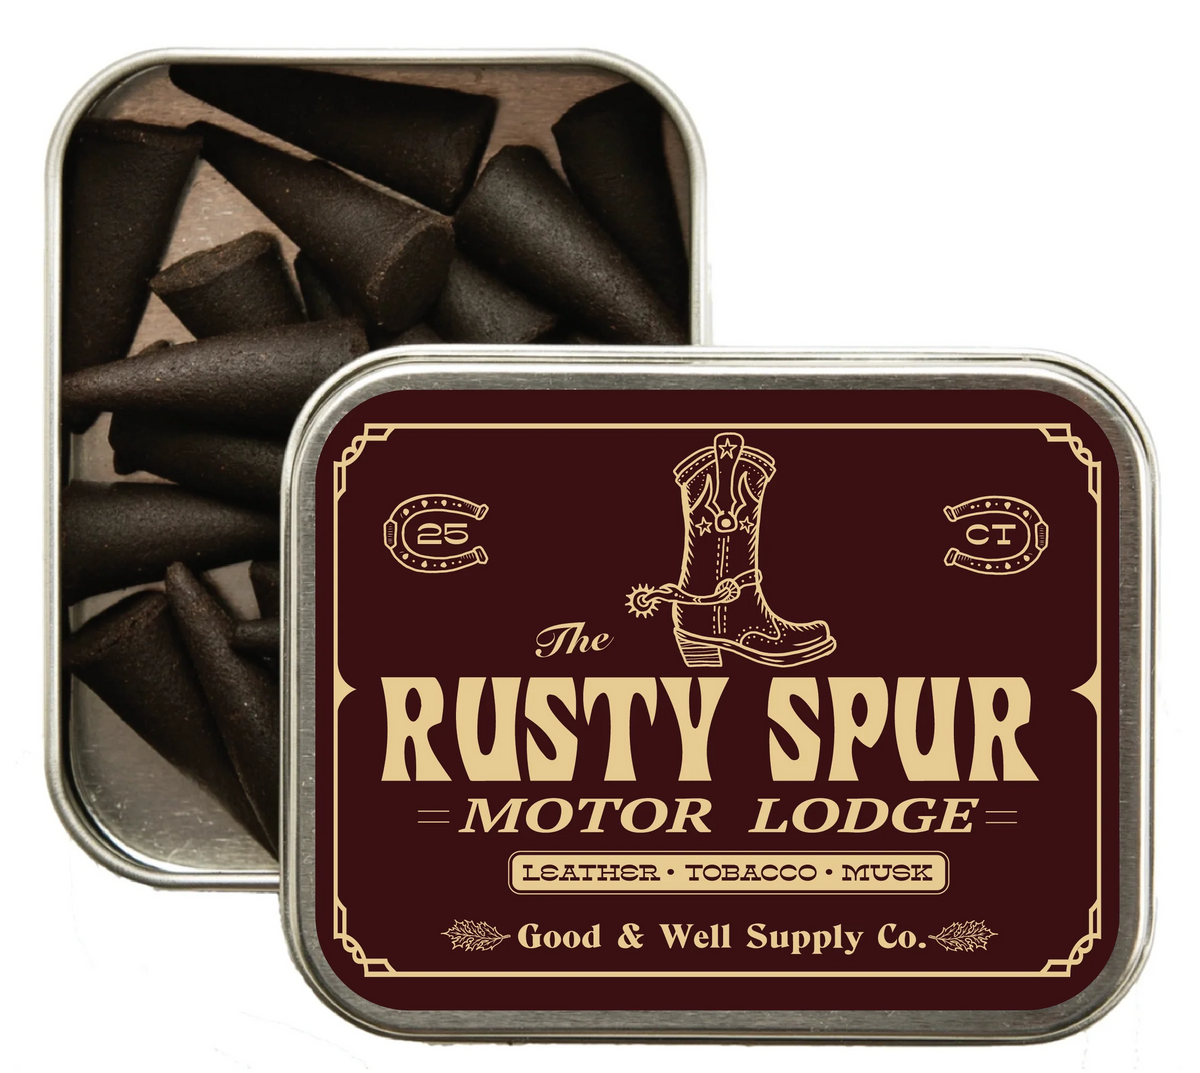 Good & Well Supply Co Rusty Spur Motor Lodge Roadside Incense